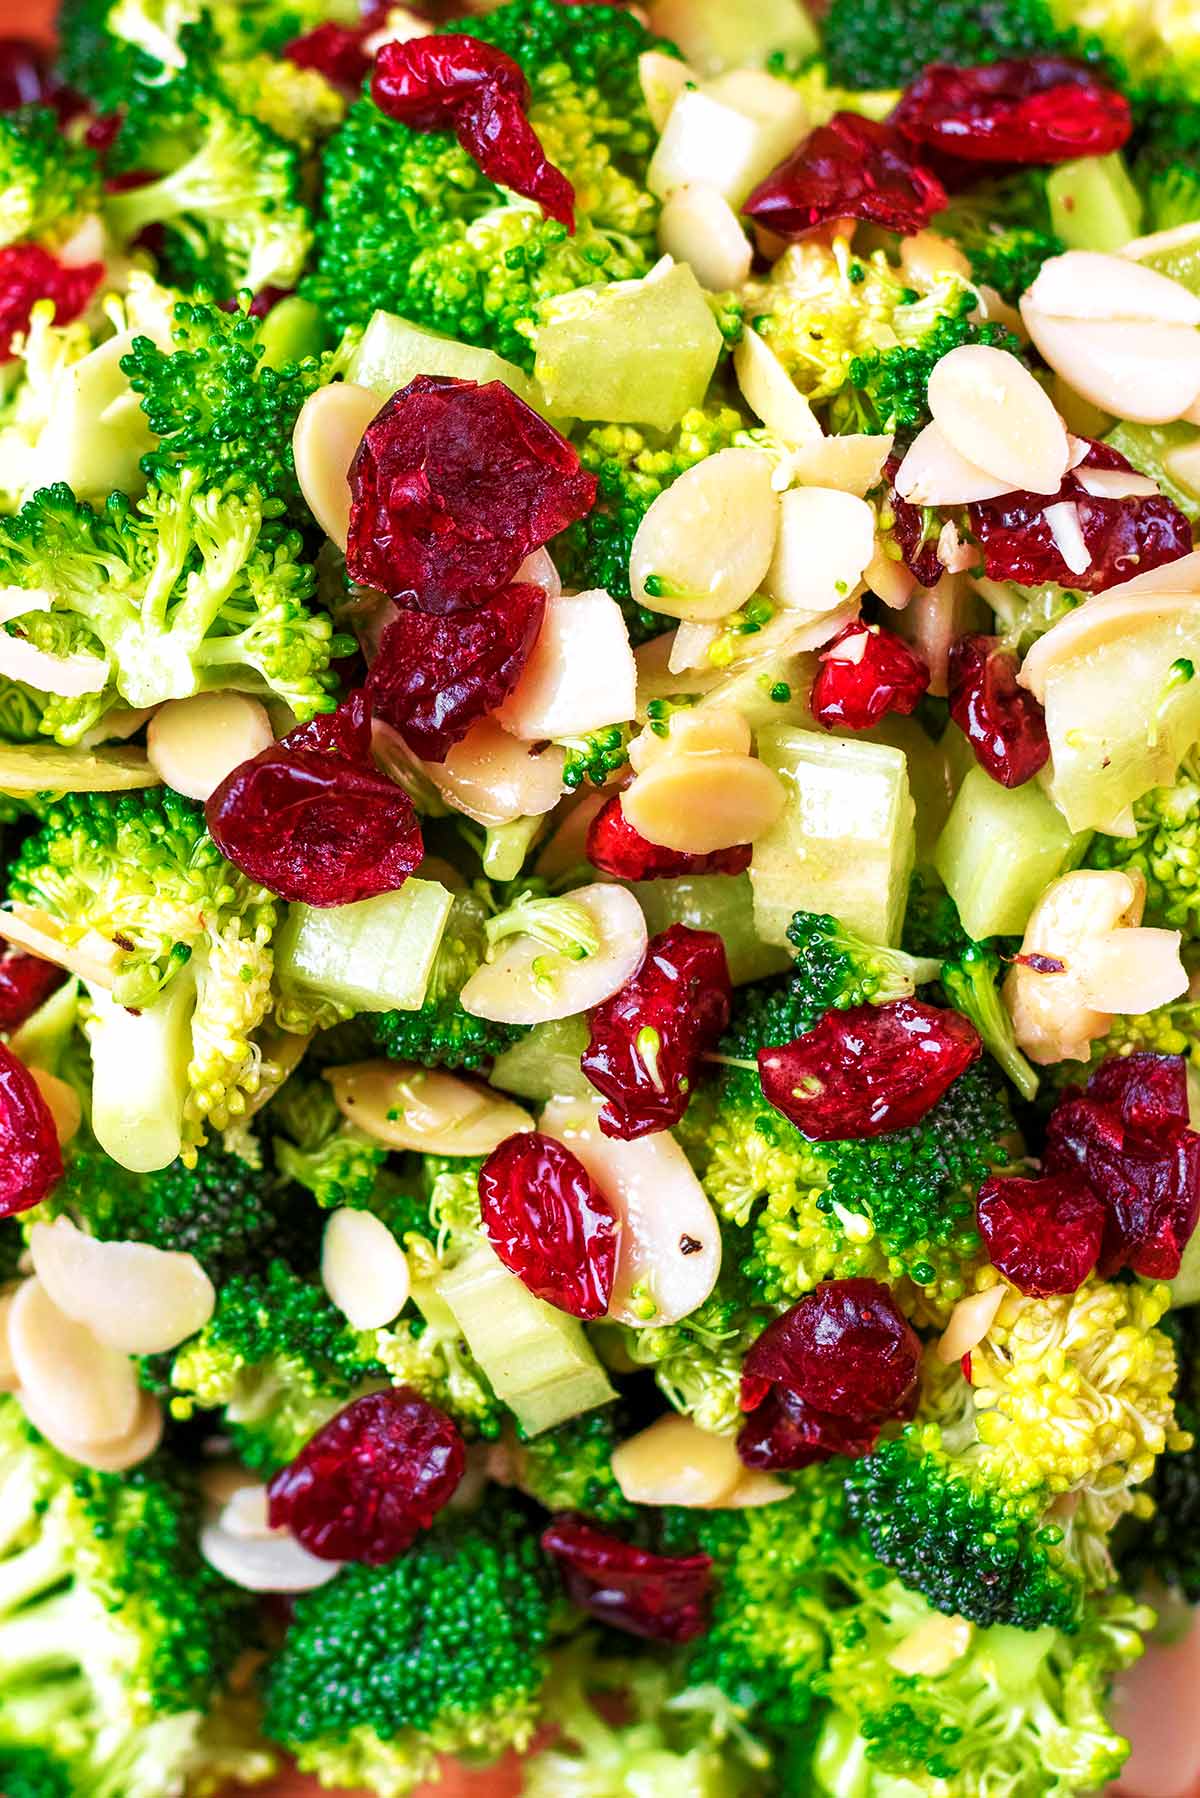 Raw broccoli florets, dried cranberries and flaked almonds all mixed together.